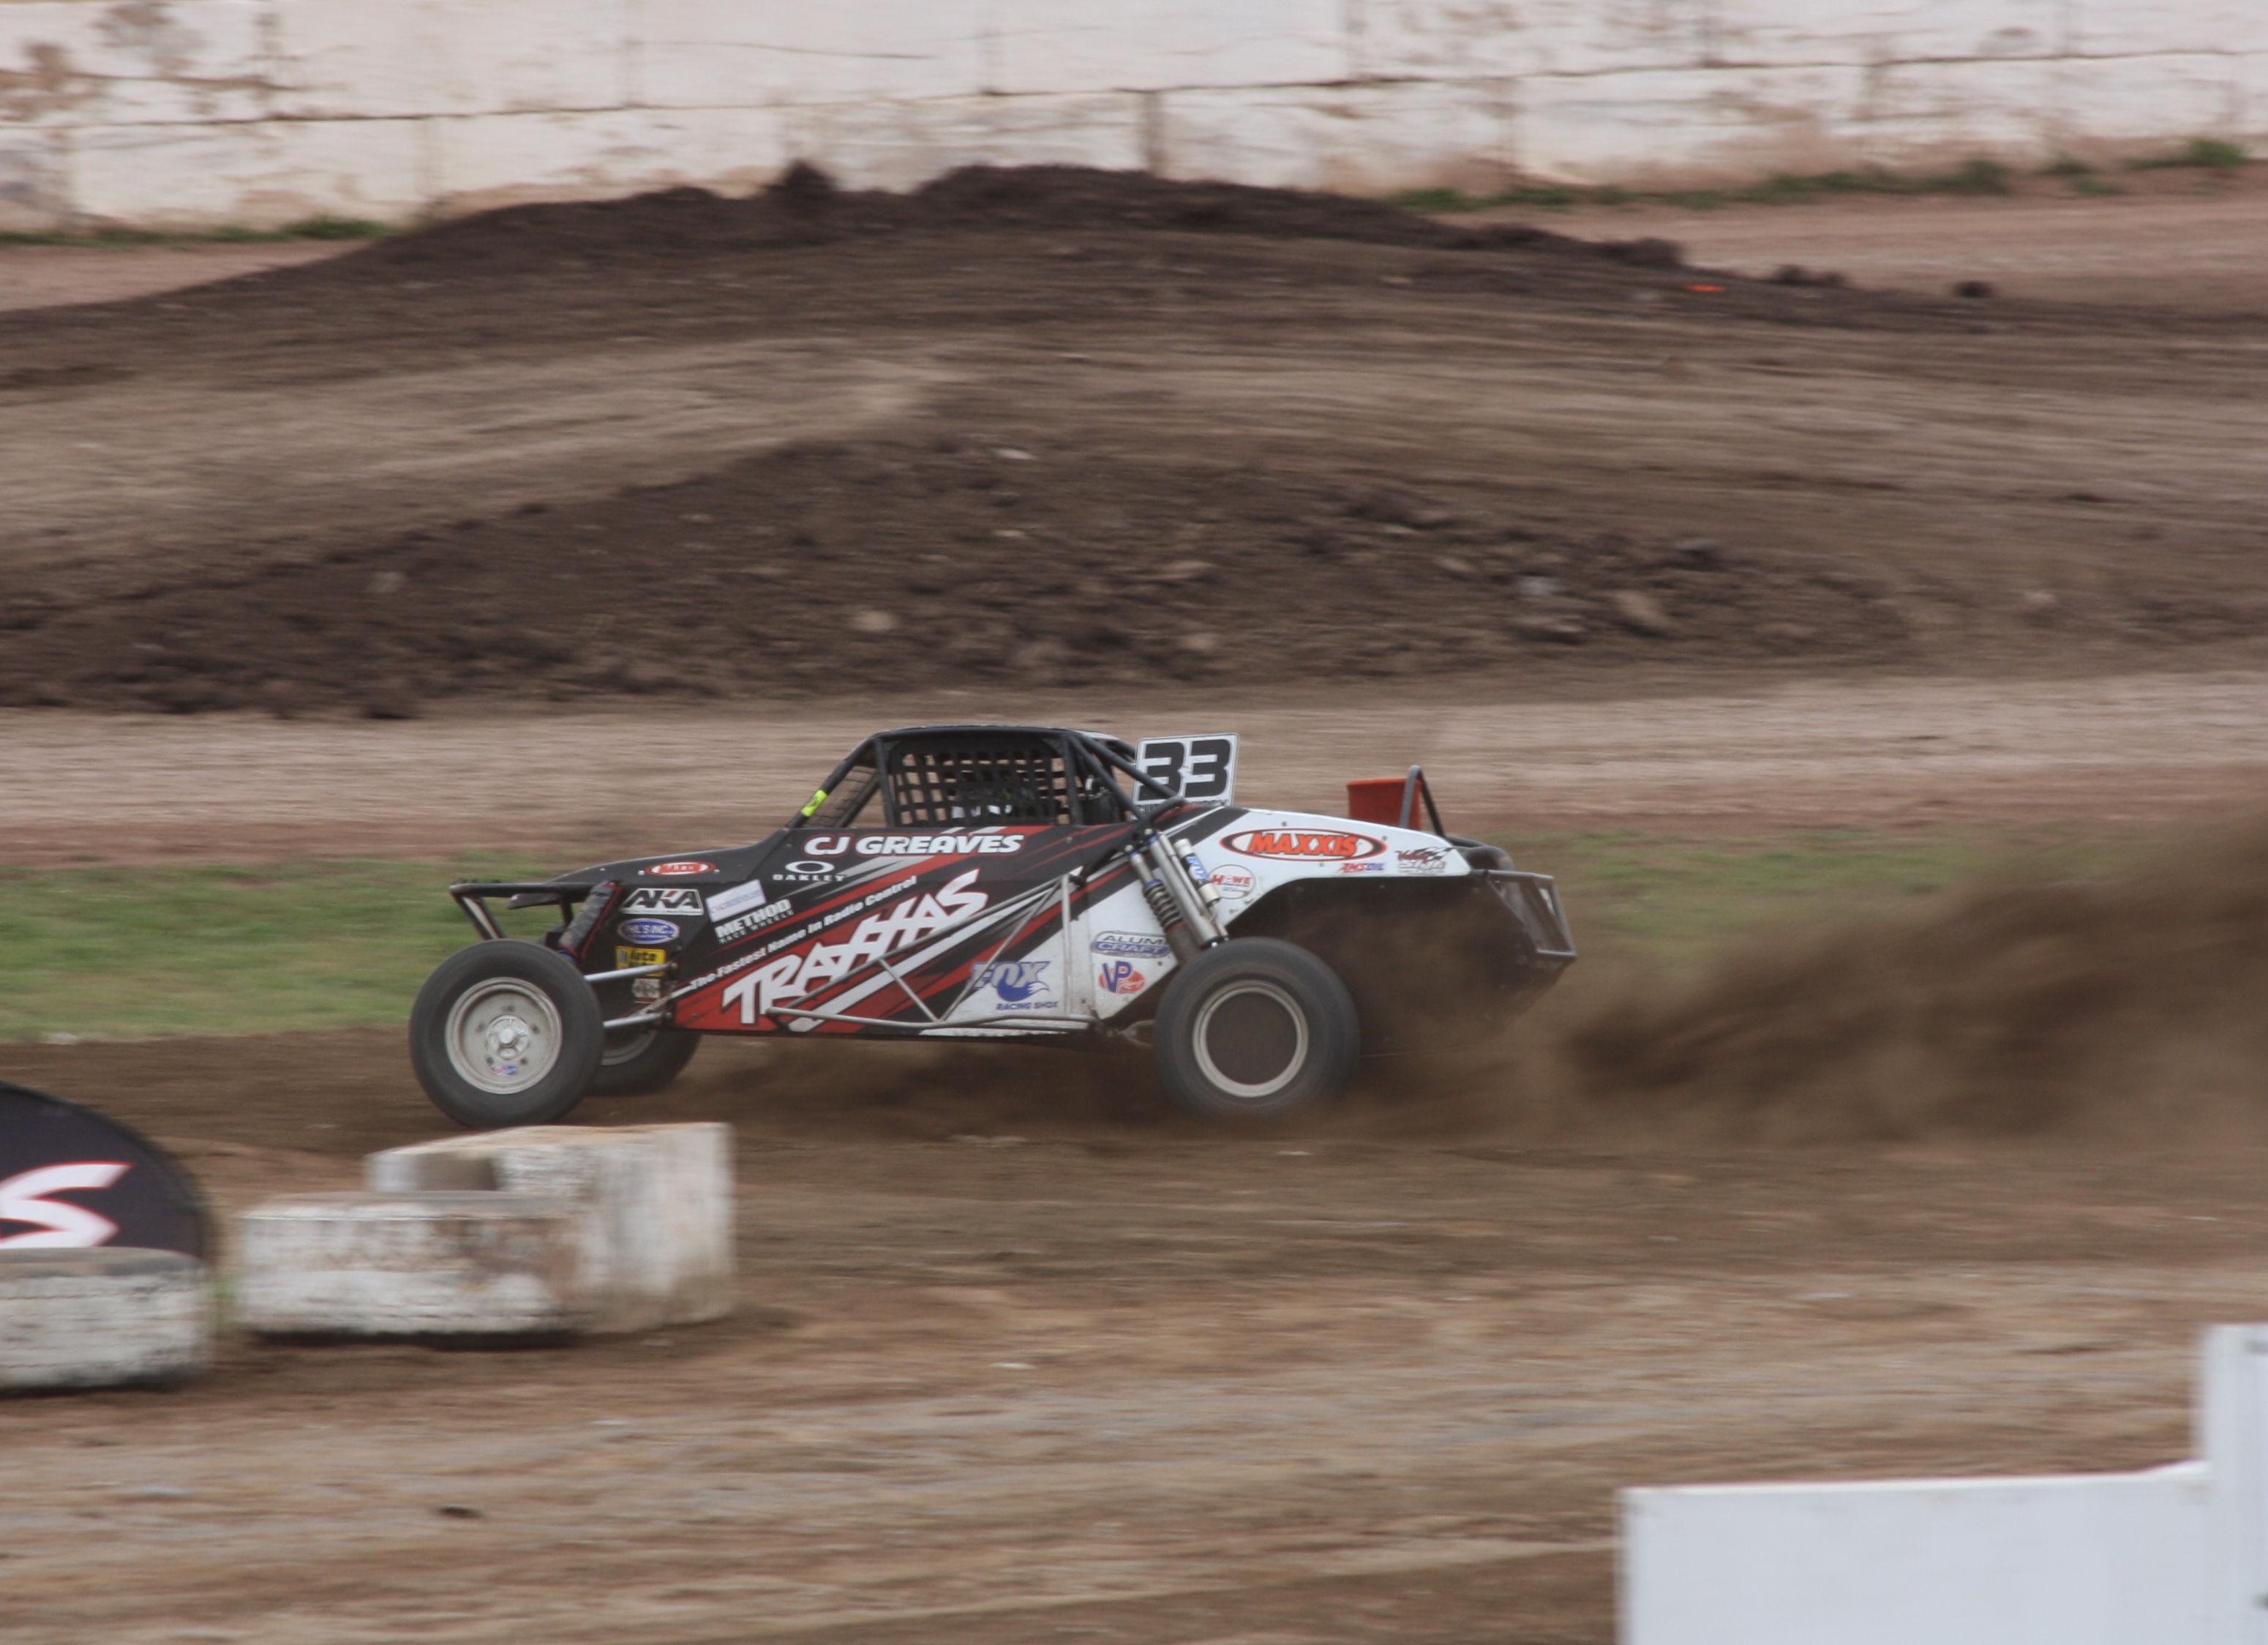 File:CJ Greaves rooster tail TORC Super Buggy Oshkosh 2011.jpg - Wikimedia  Commons